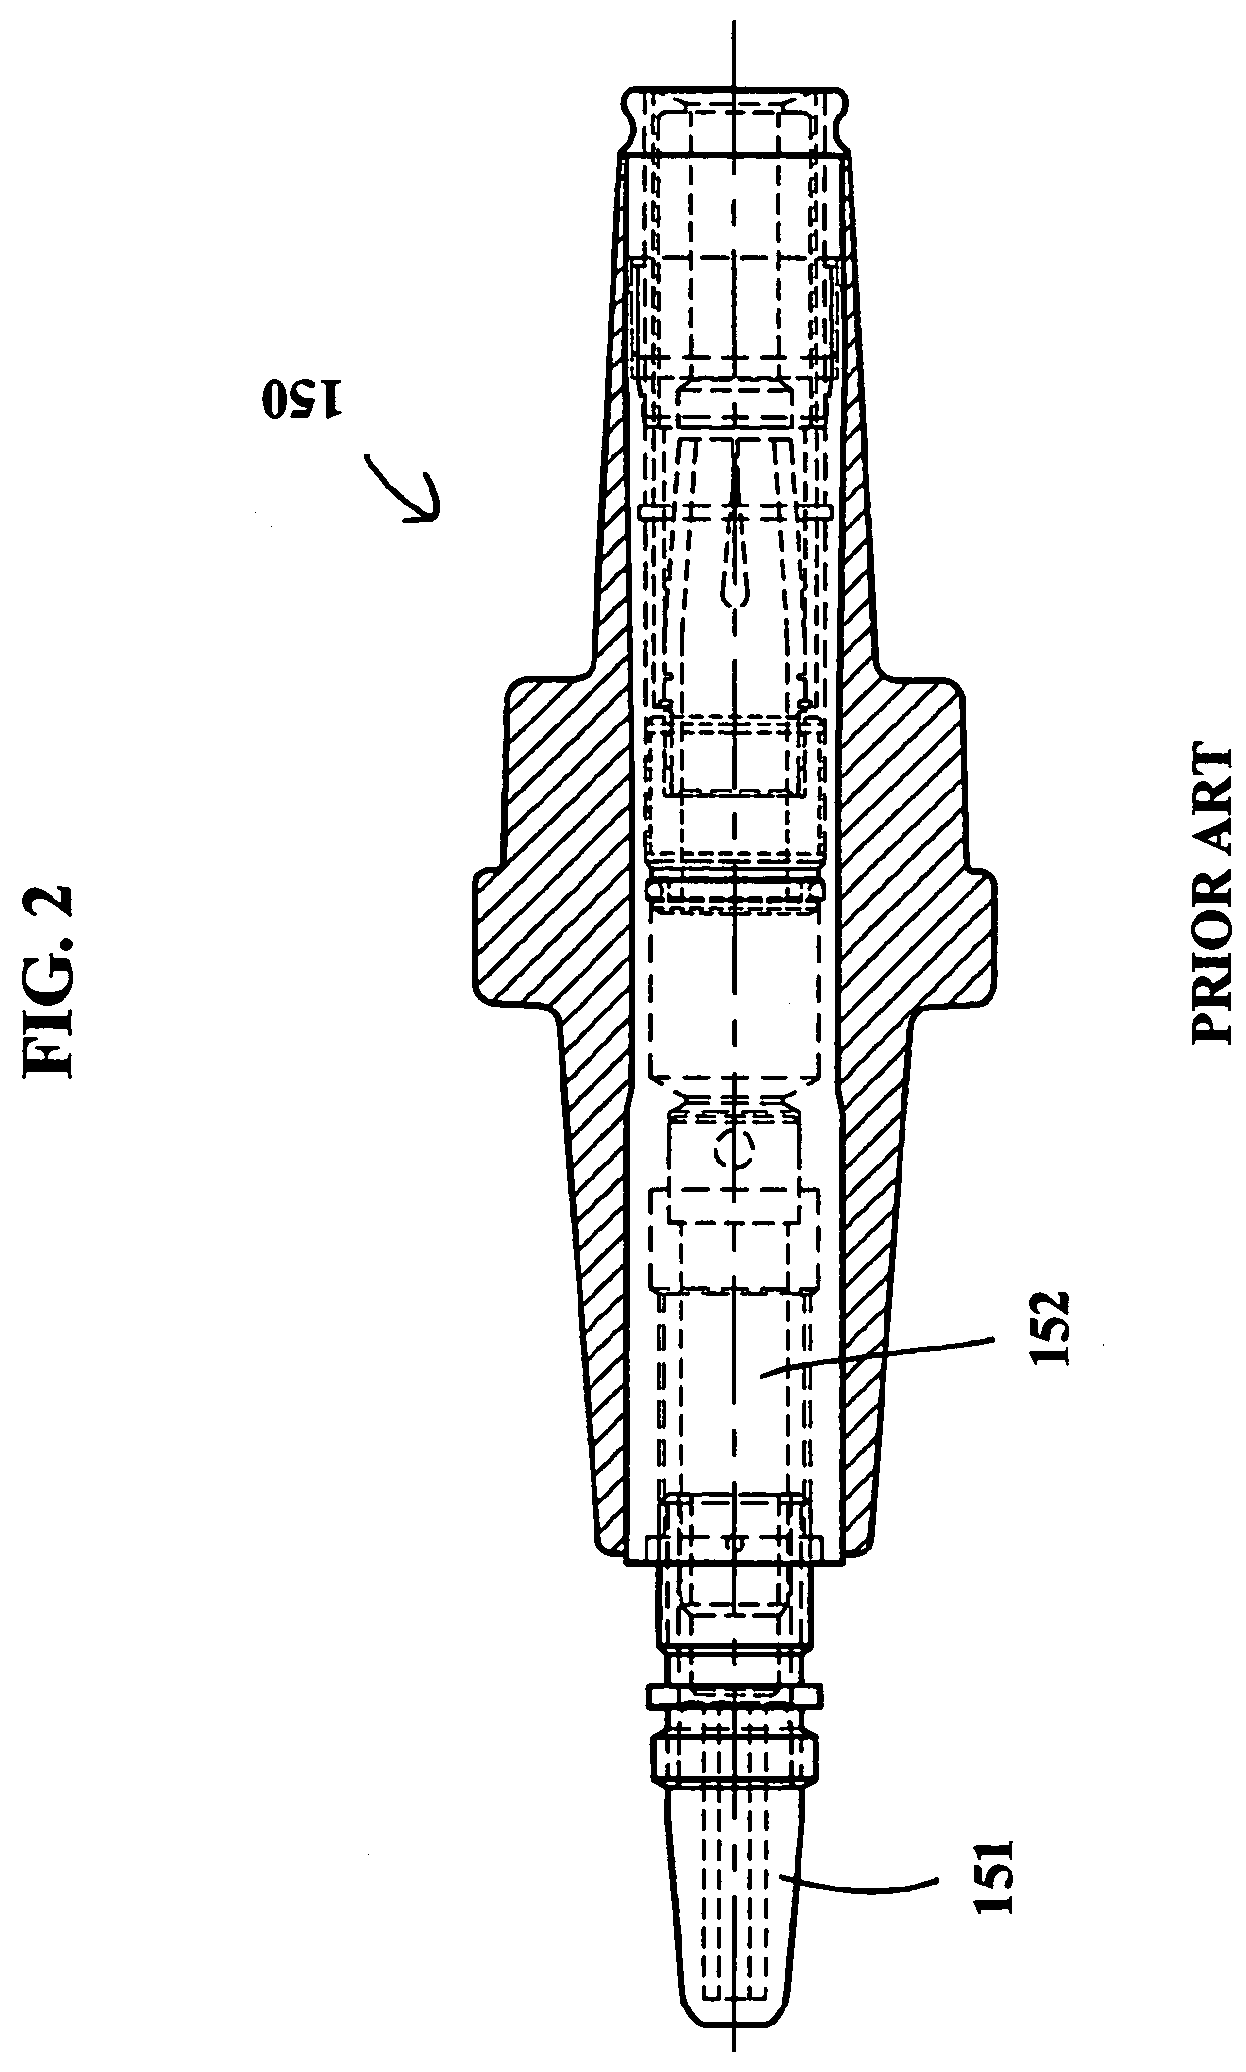 Multiple bore termination system having an integrally formed component